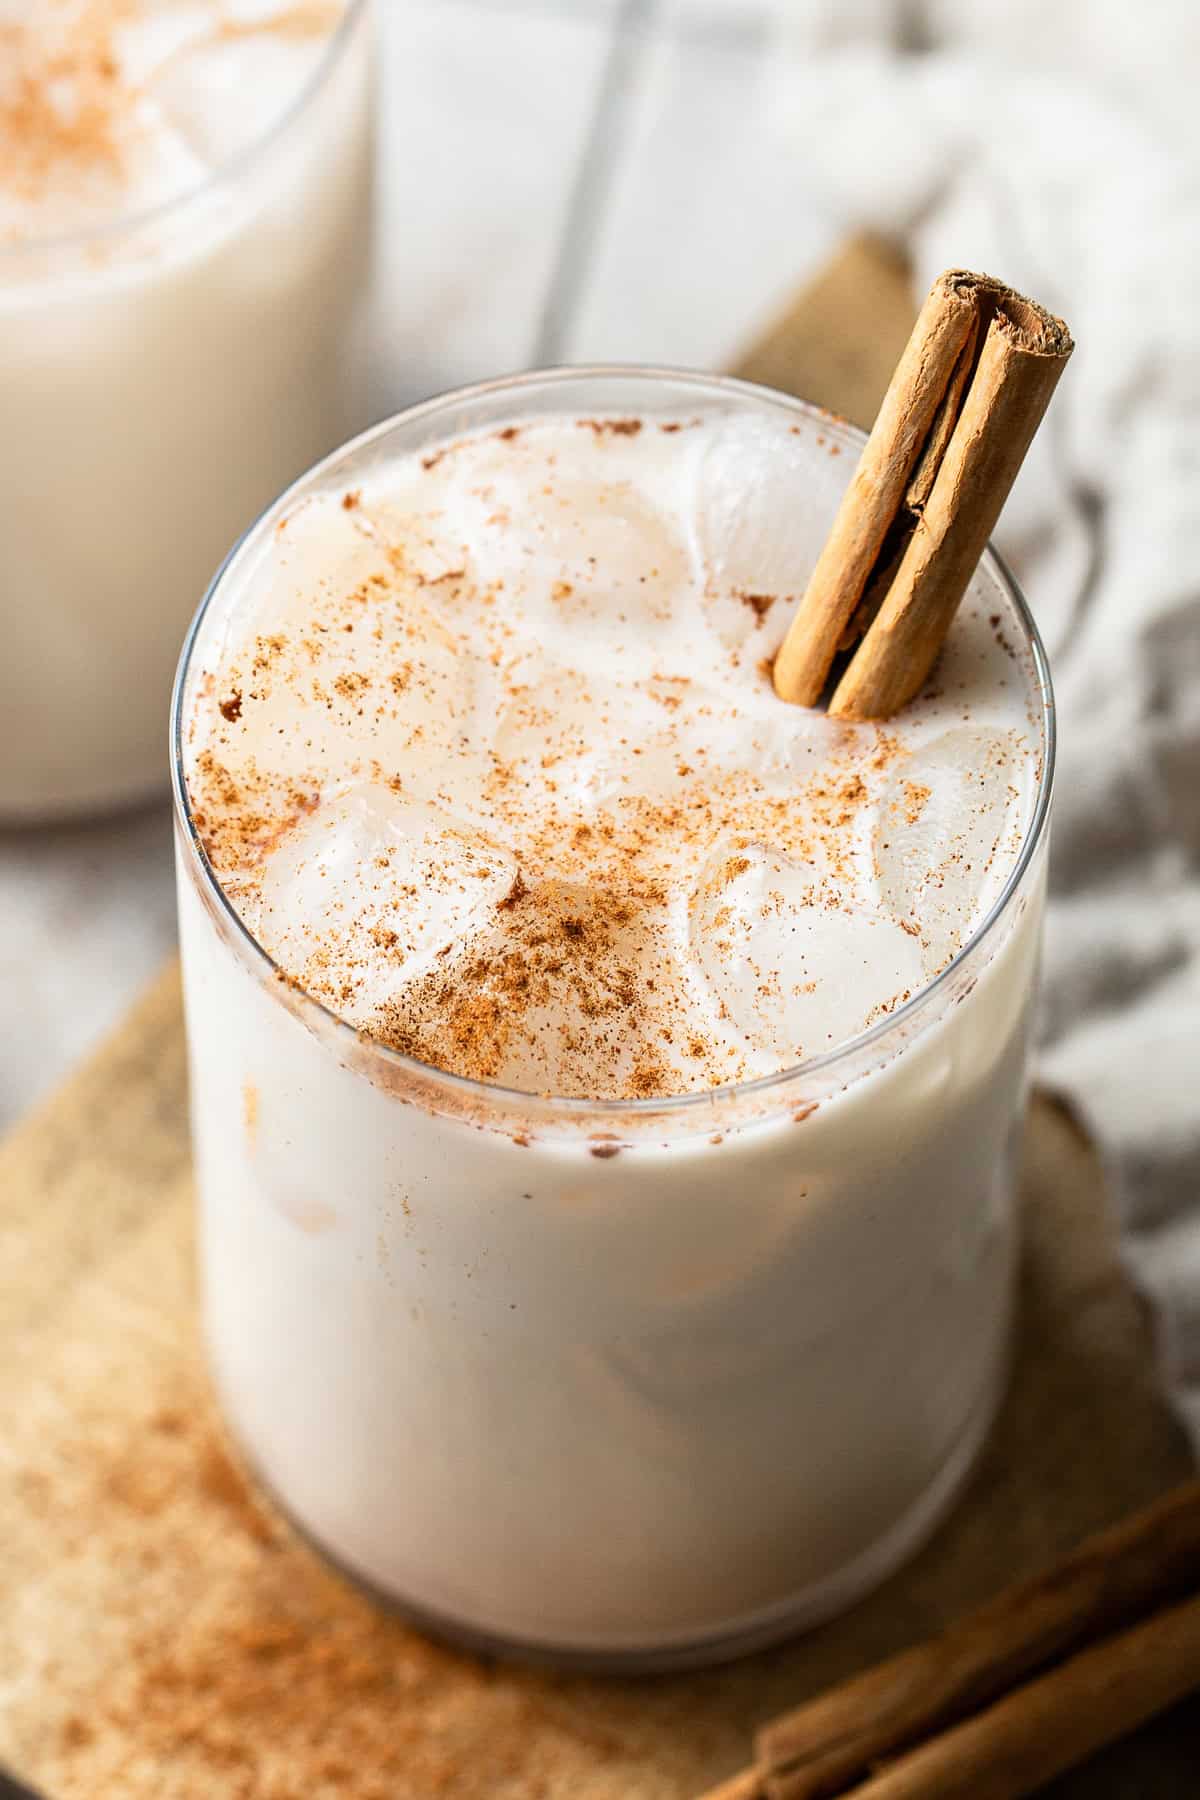 Horchata served over ice in a glass and garnished with a dusting of ground cinnamon and a cinnamon stick